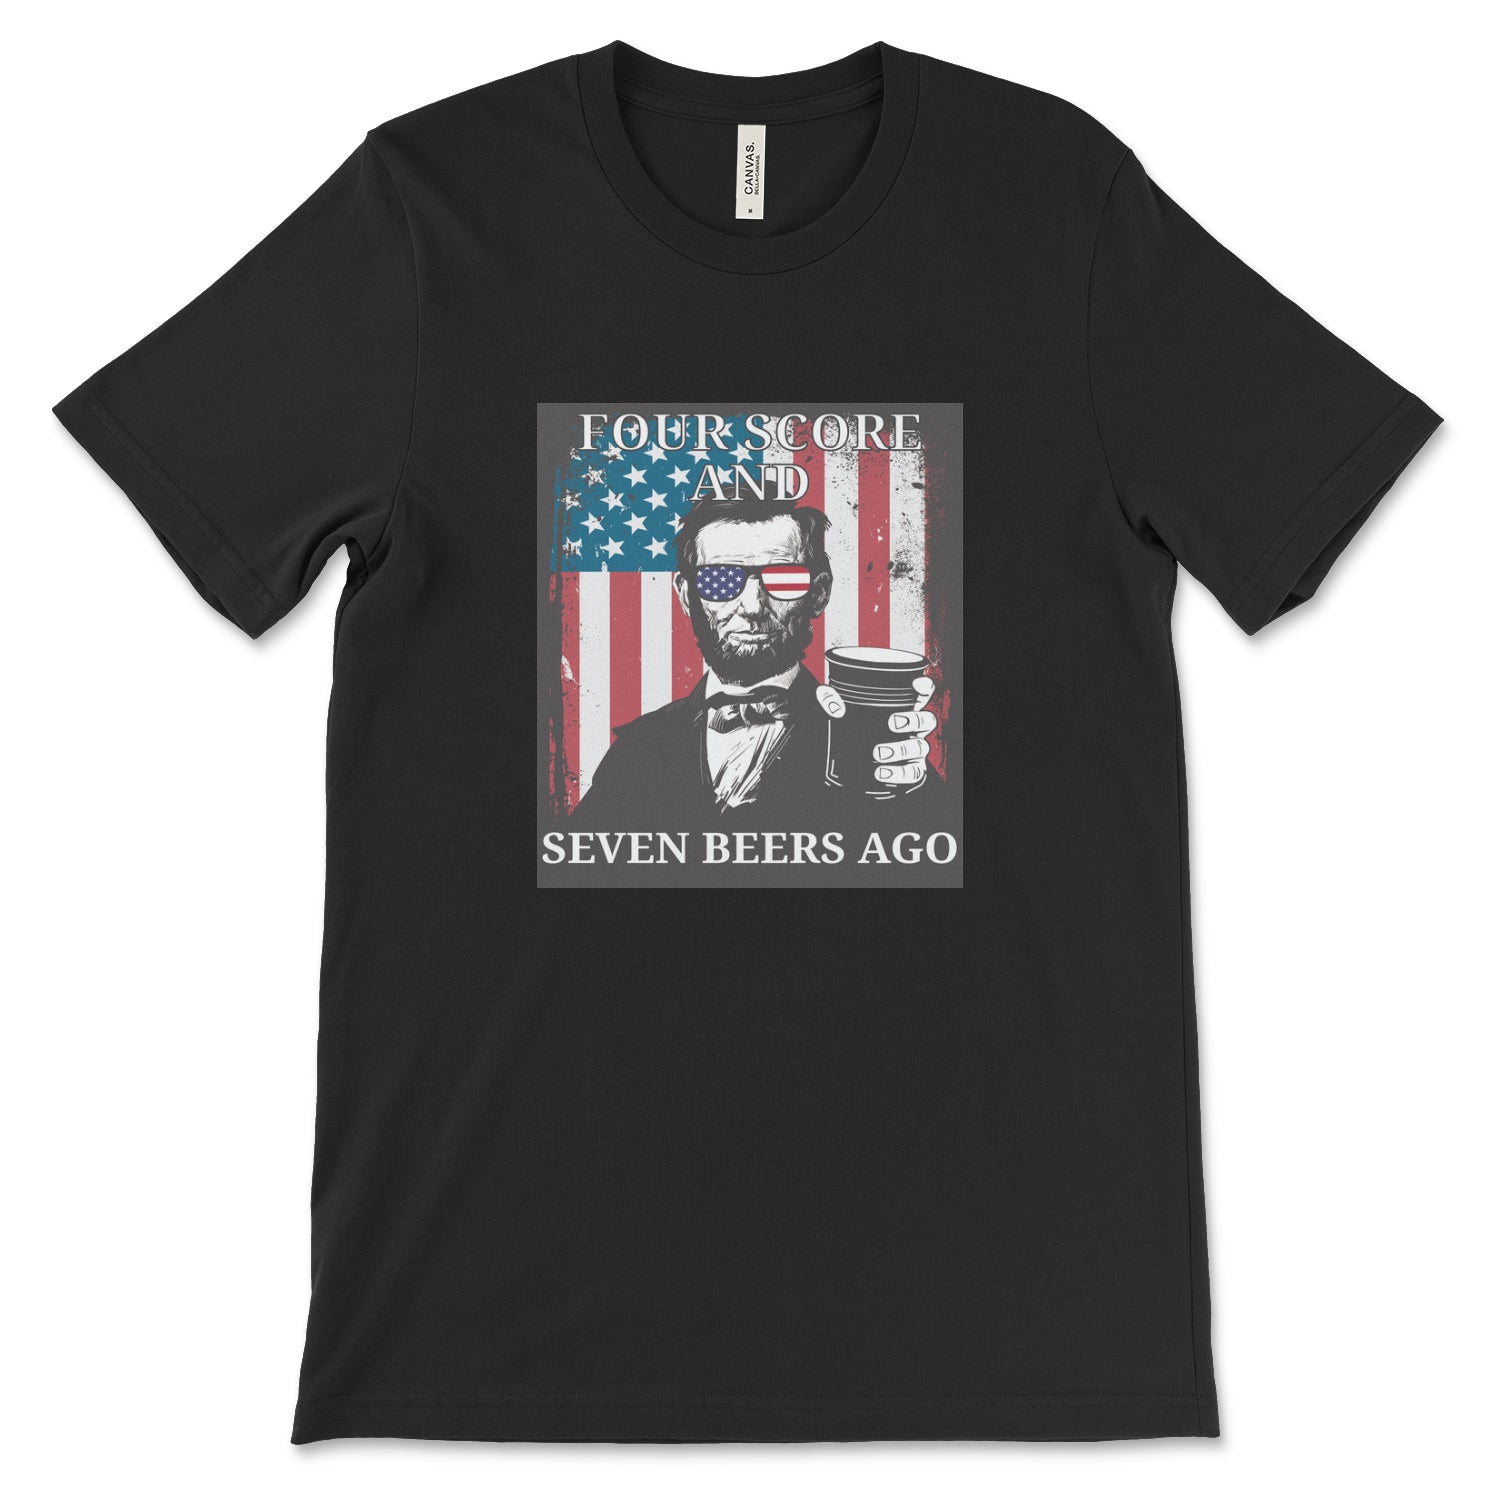 FOUR SCORE AND SEVEN BEERS AGO SHORT SLEEVE T-SHIRT